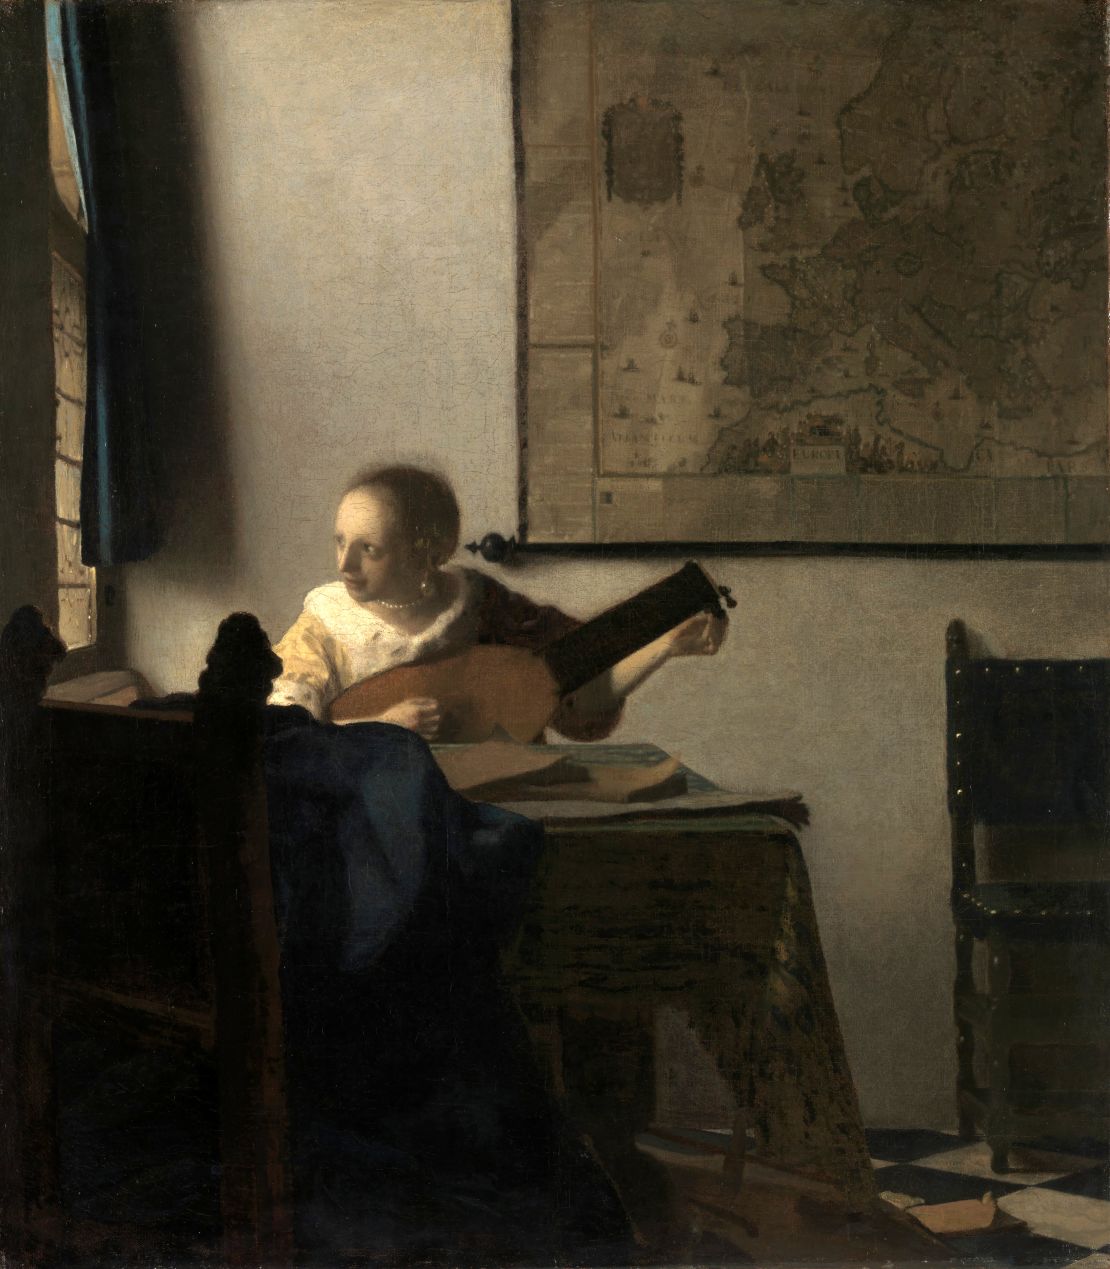 Vermeer's "Woman with a lute near a window" (1662-1663)